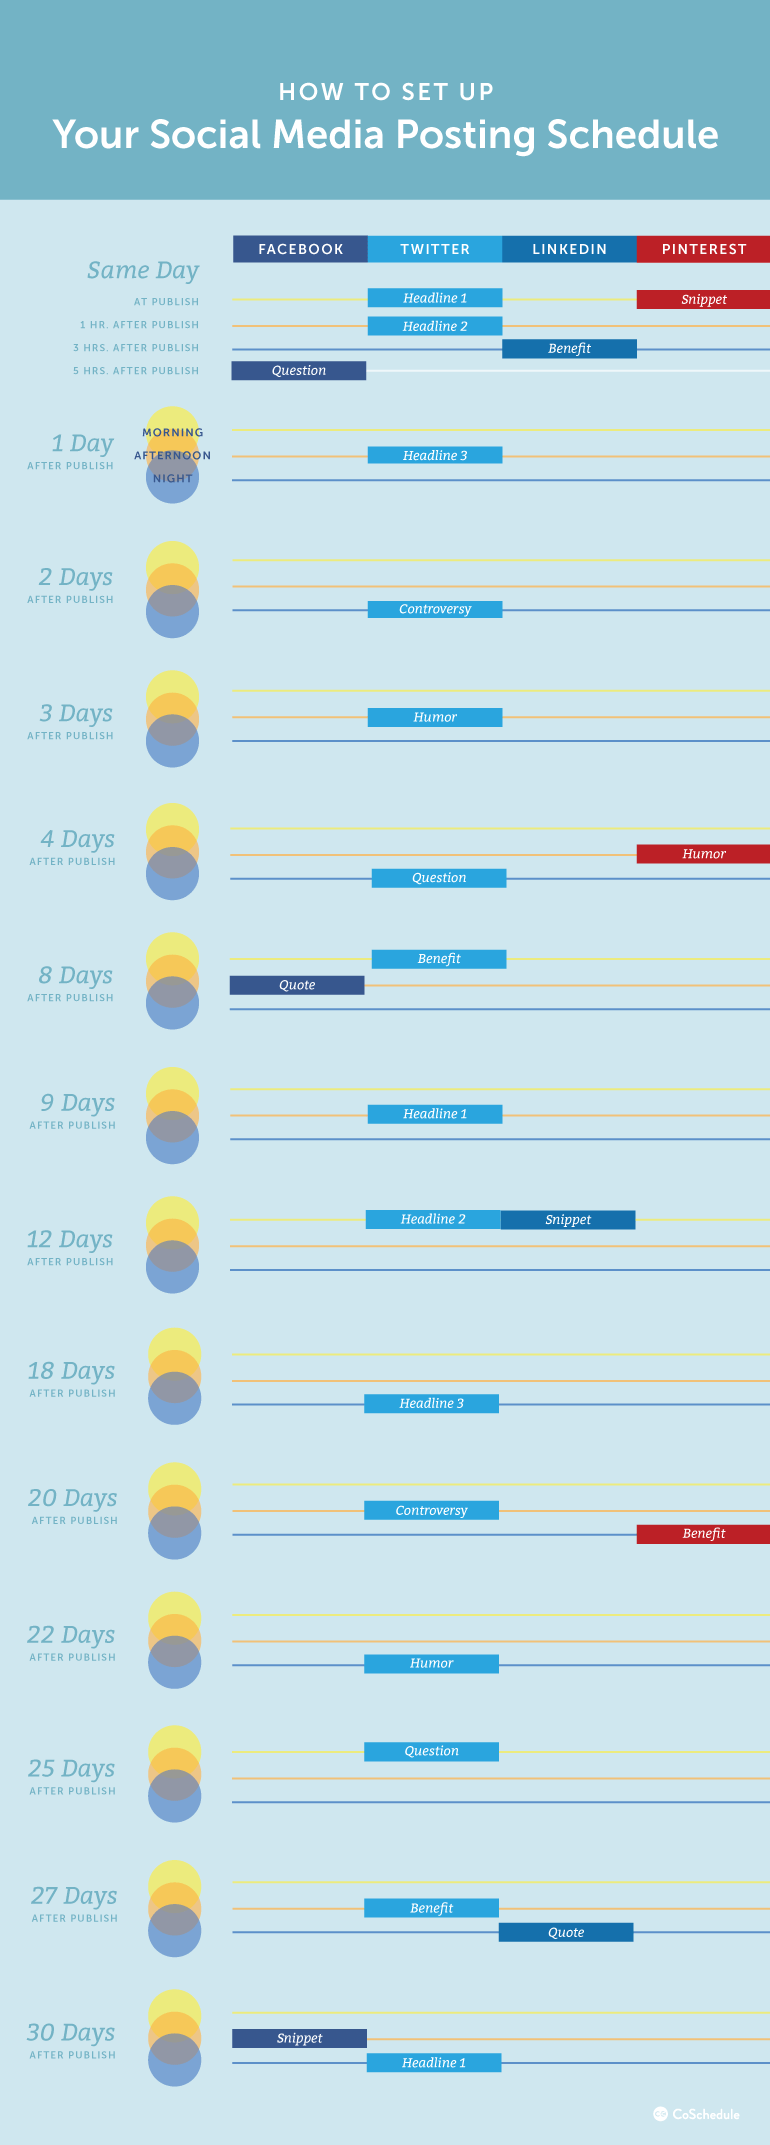 an infographic showcasing a schedule for posting to Facebook, Twitter, LinkedIn and Pinterest